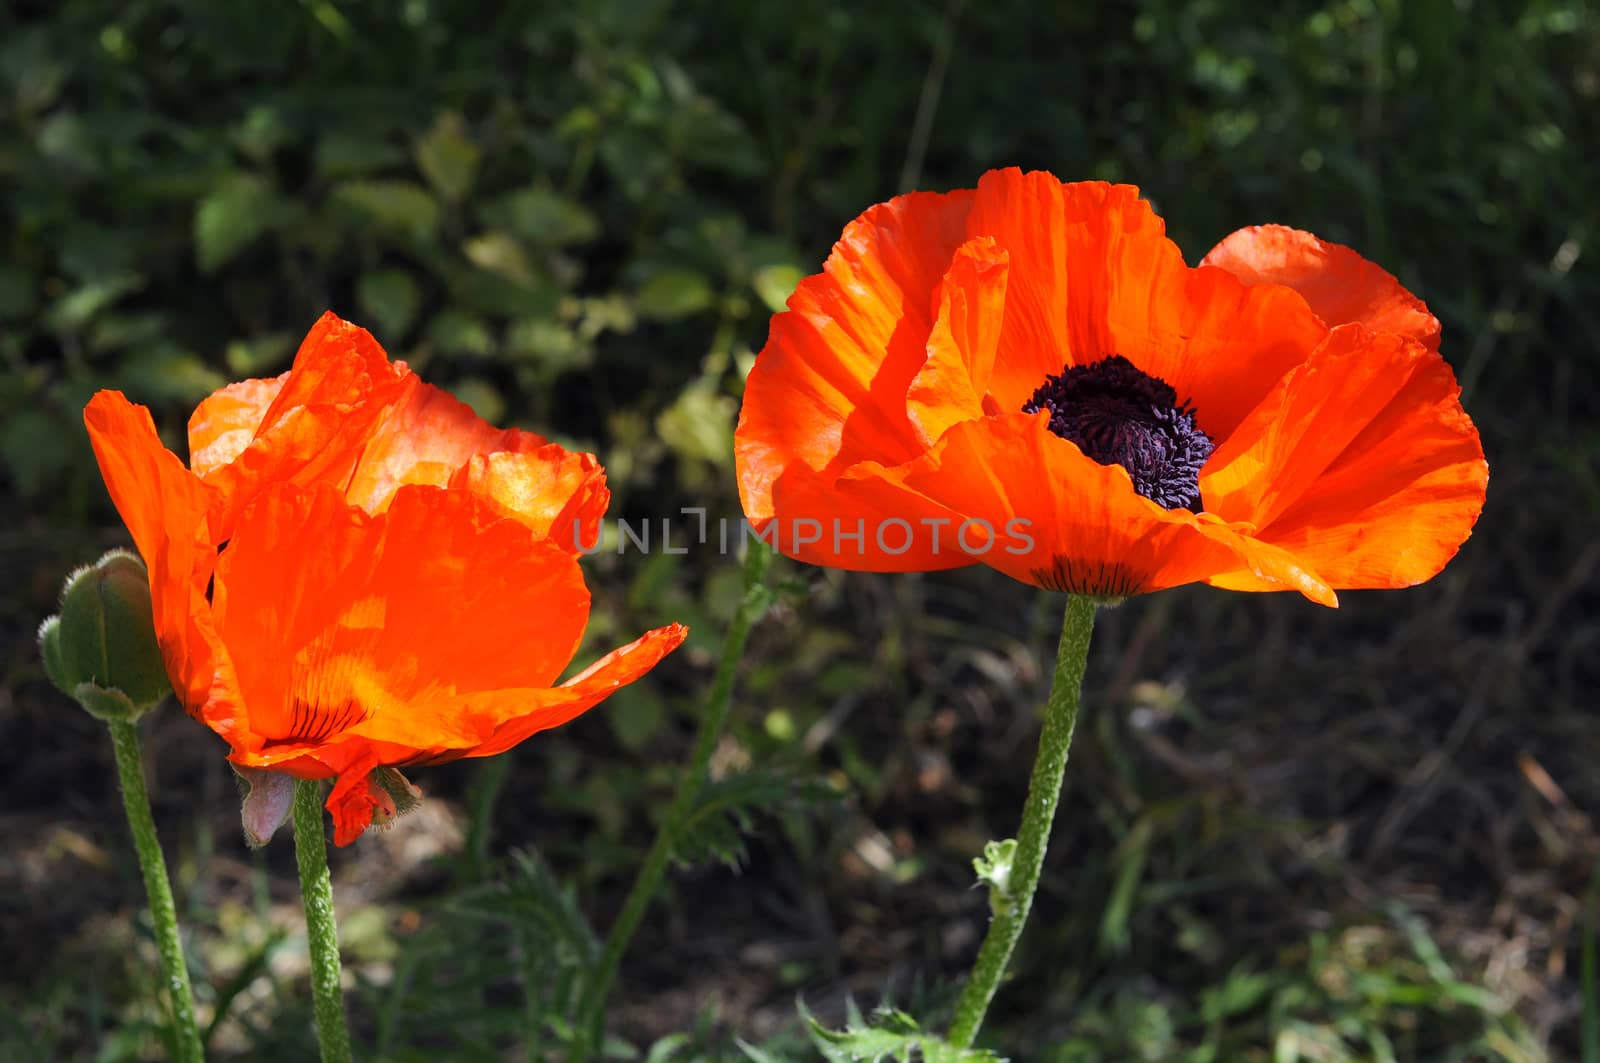 Beautiful red poppies in a garden. by veronka72